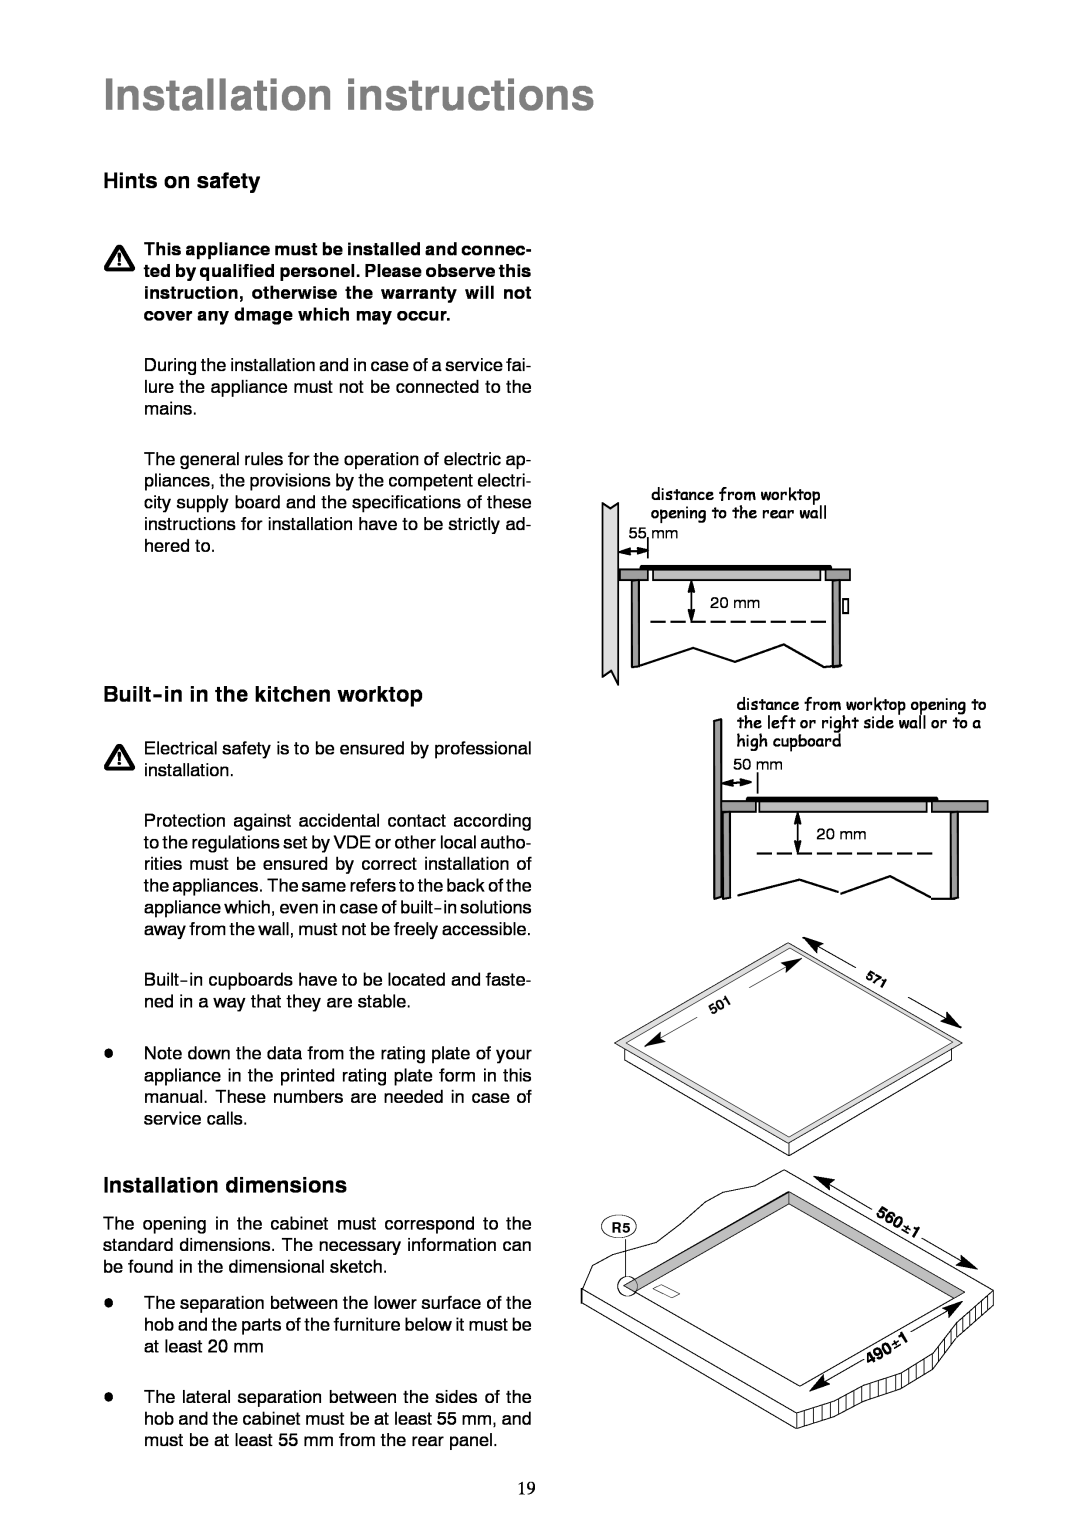 Zanussi ZKT 622 HX Installation instructions, Hints on safety, Built-in in the kitchen worktop, Installation dimensions 